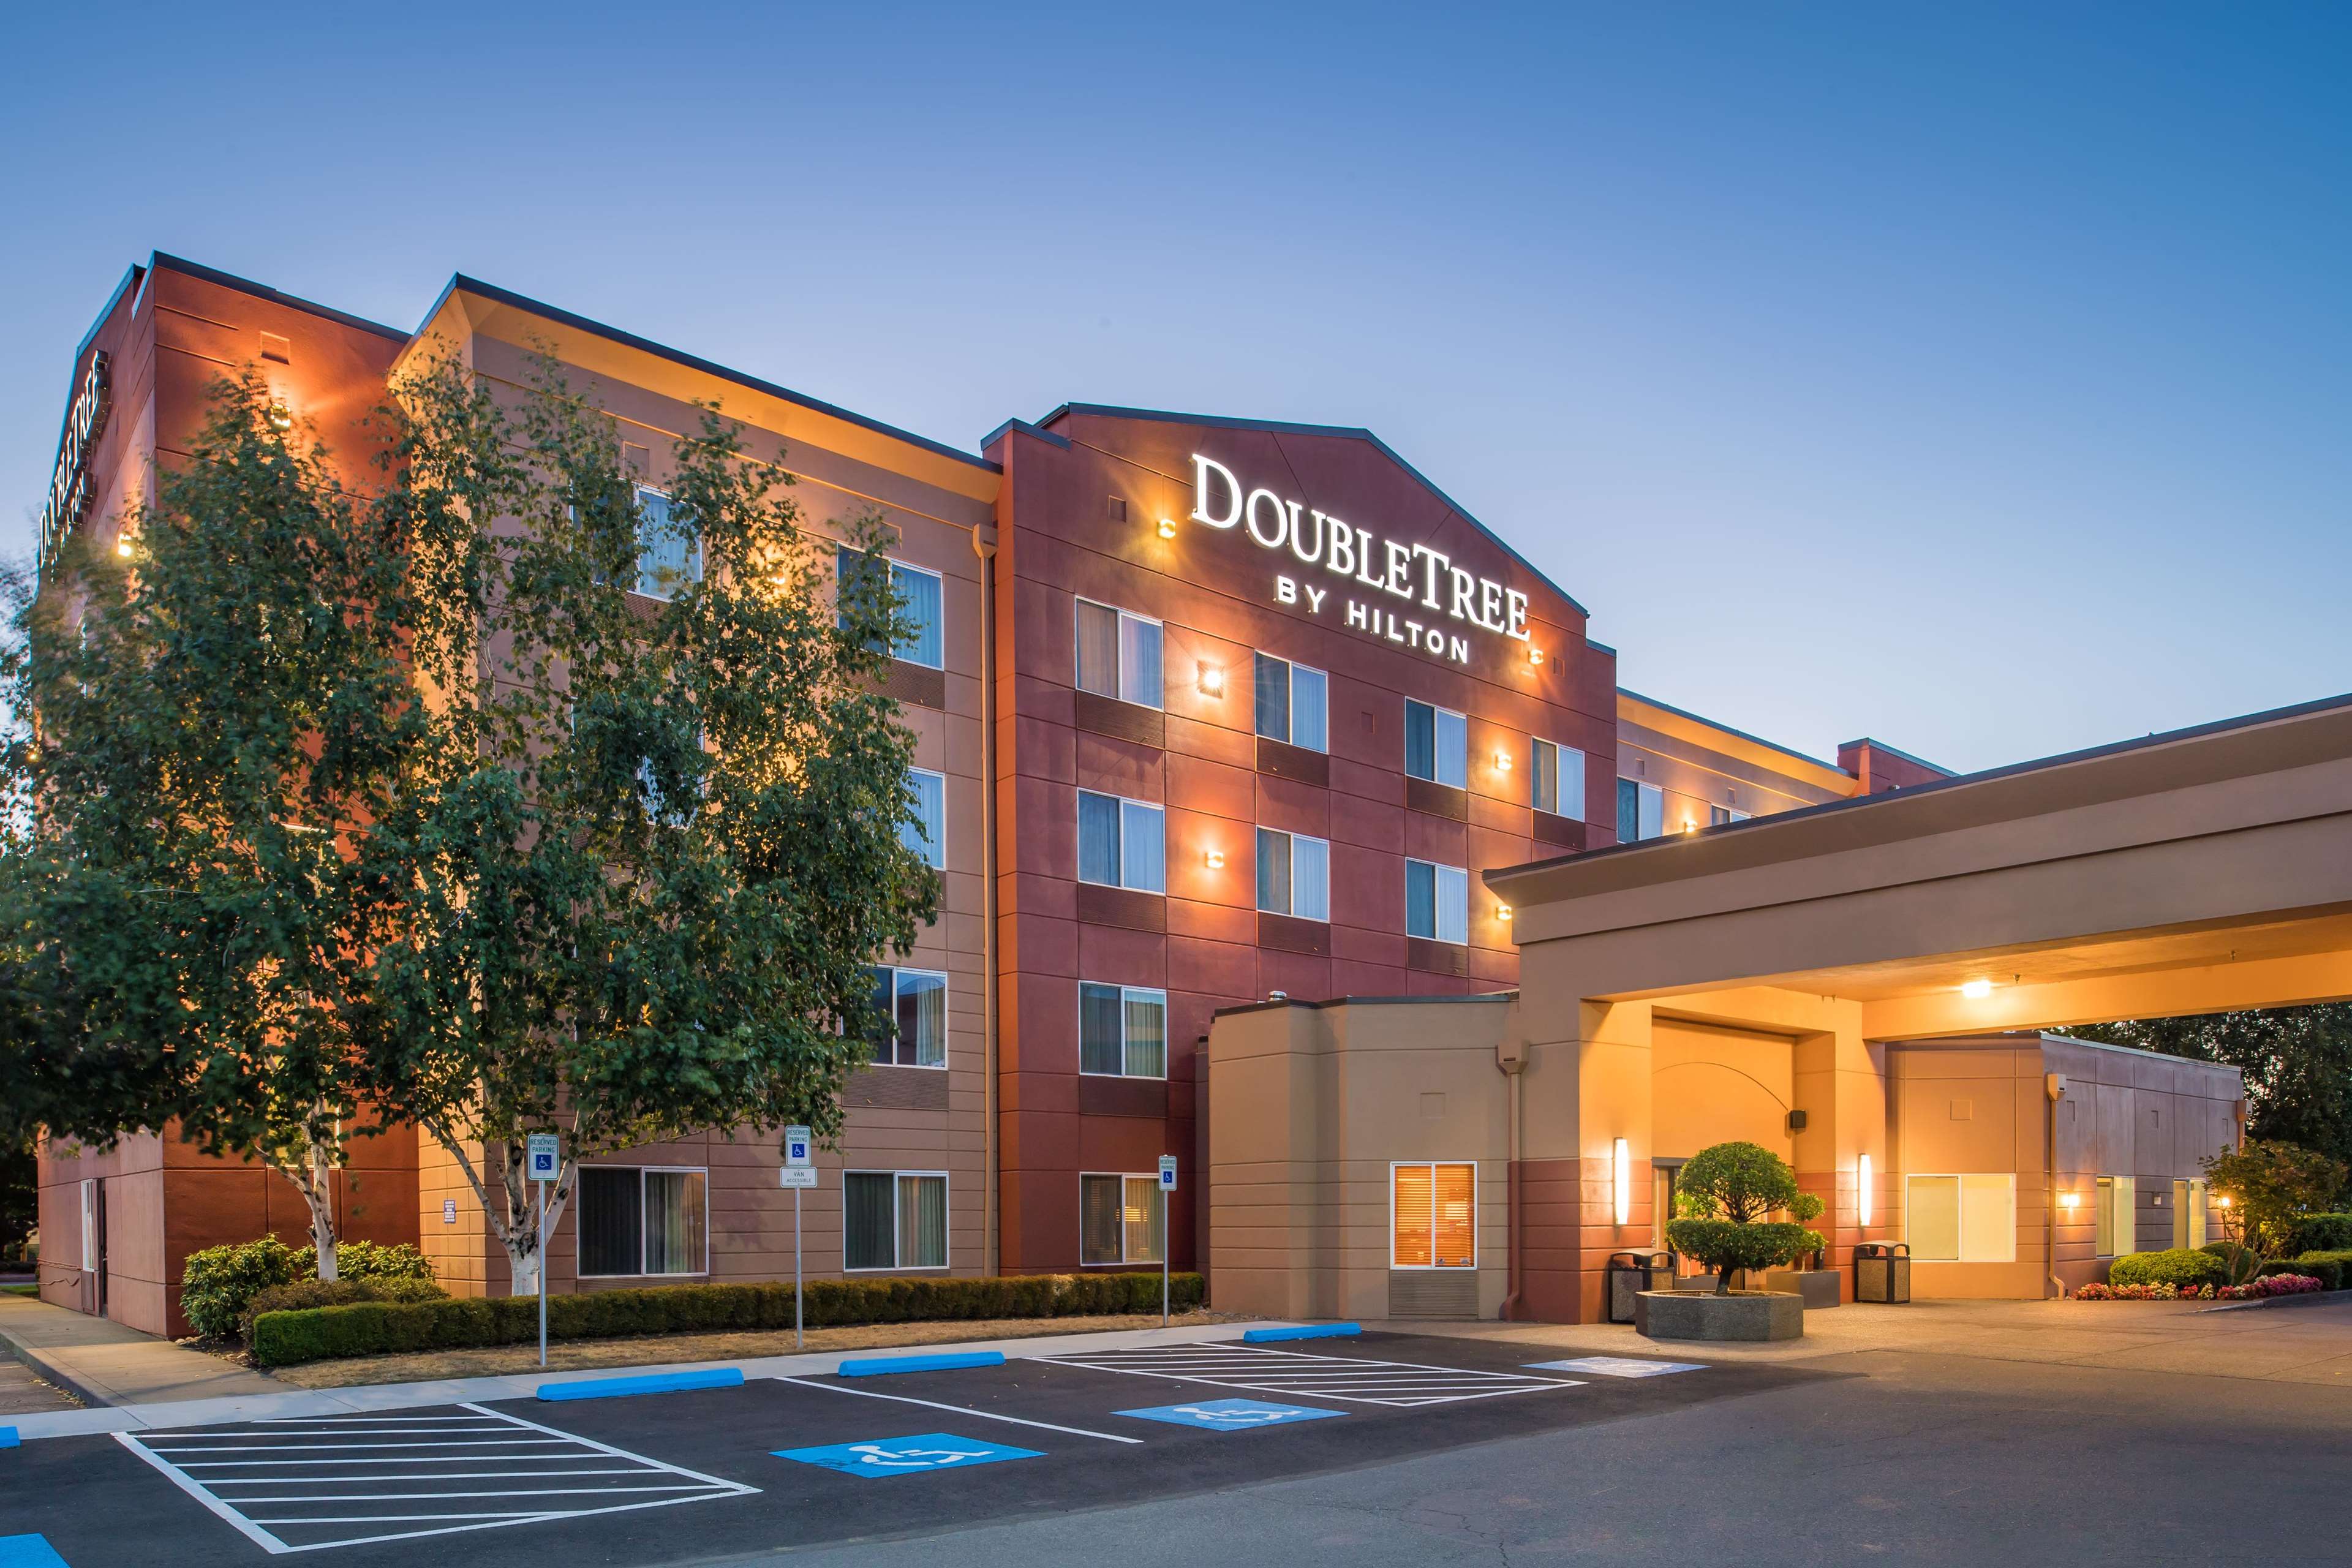 DoubleTree by Hilton Hotel Salem, Oregon Coupons near me in Salem, OR 97301 | 8coupons